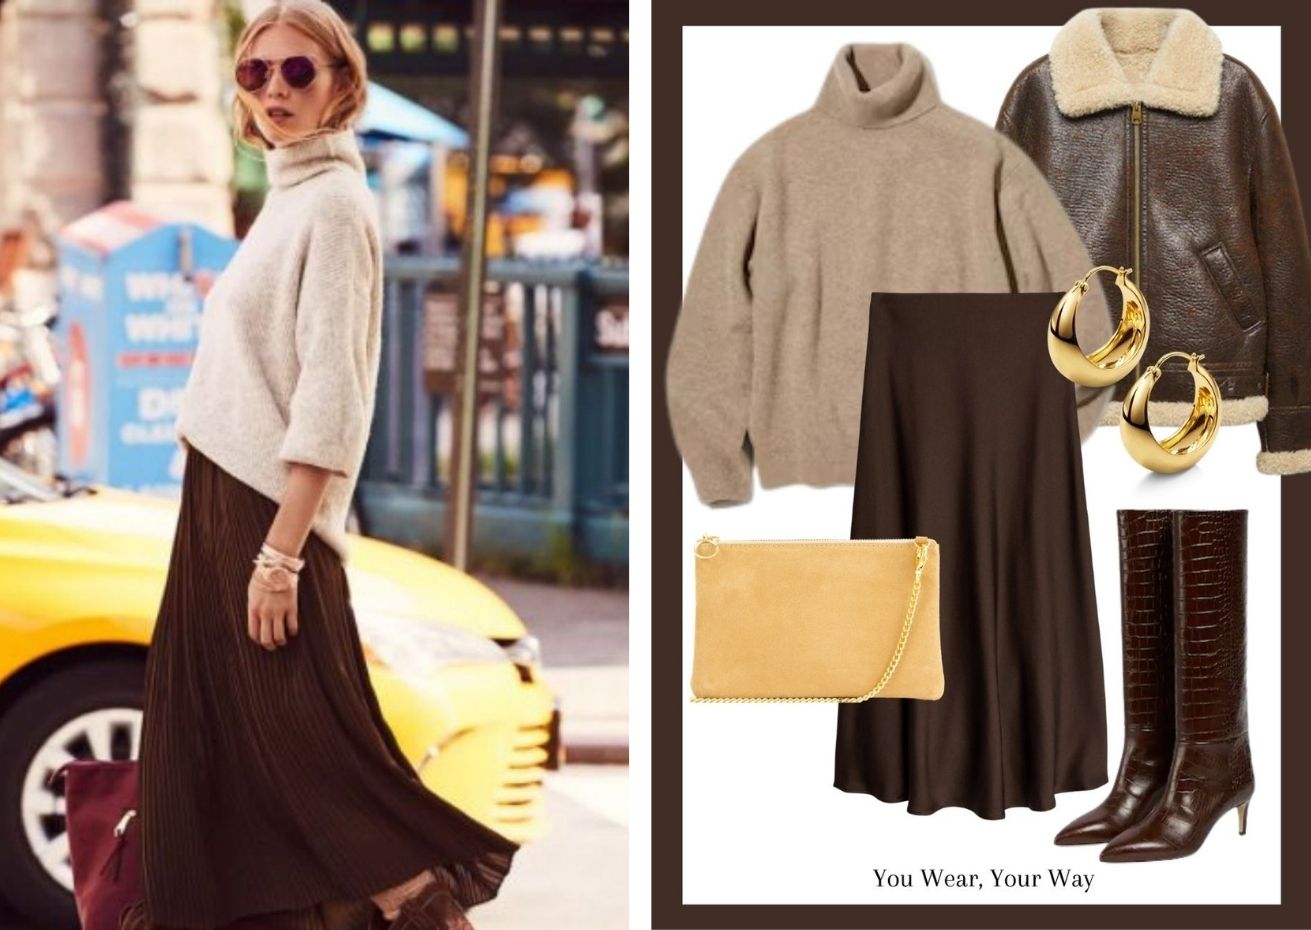 brown skirt and tonal look - dida ritchie rosa tan suede clutch bag